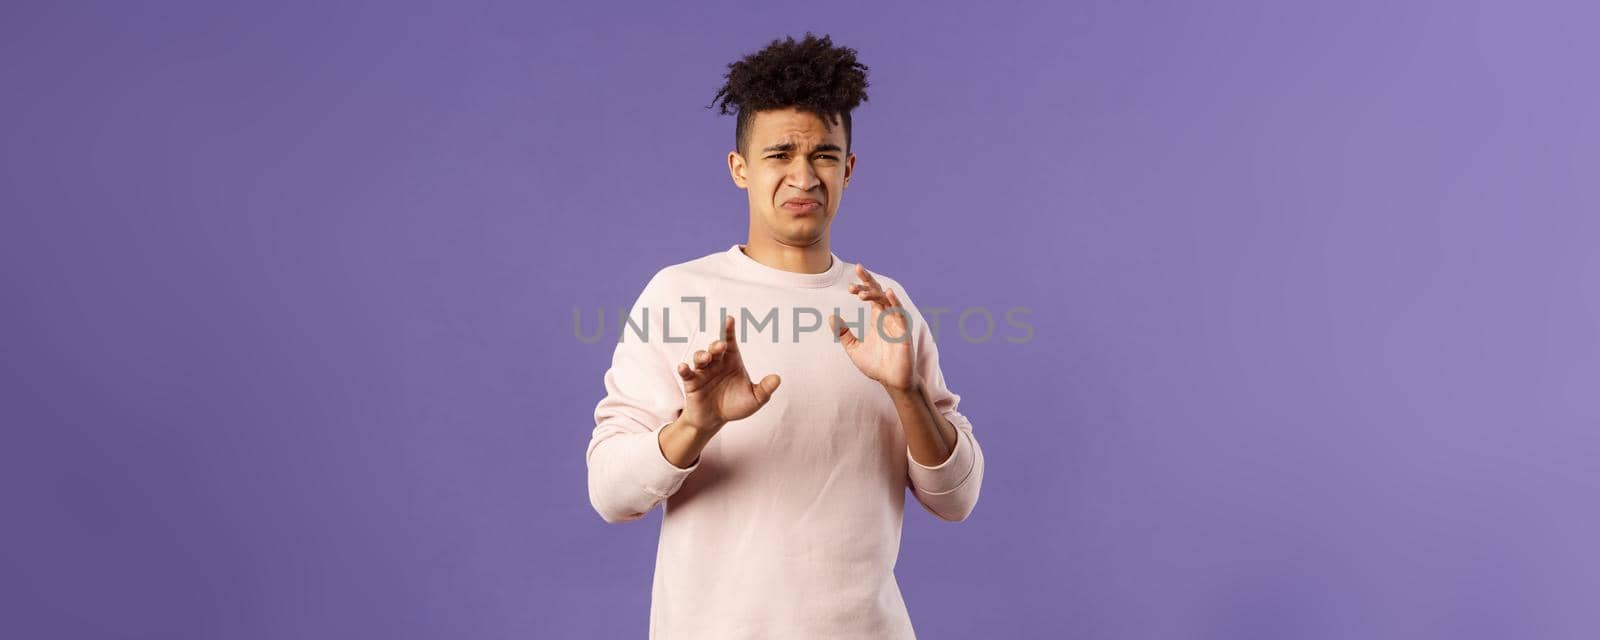 Phew get it away from me. Portrait of disgusted young man smelling something awful, step away and blocking it with raised arms, refuse grimacing with aversion and reluctance, purple background by Benzoix